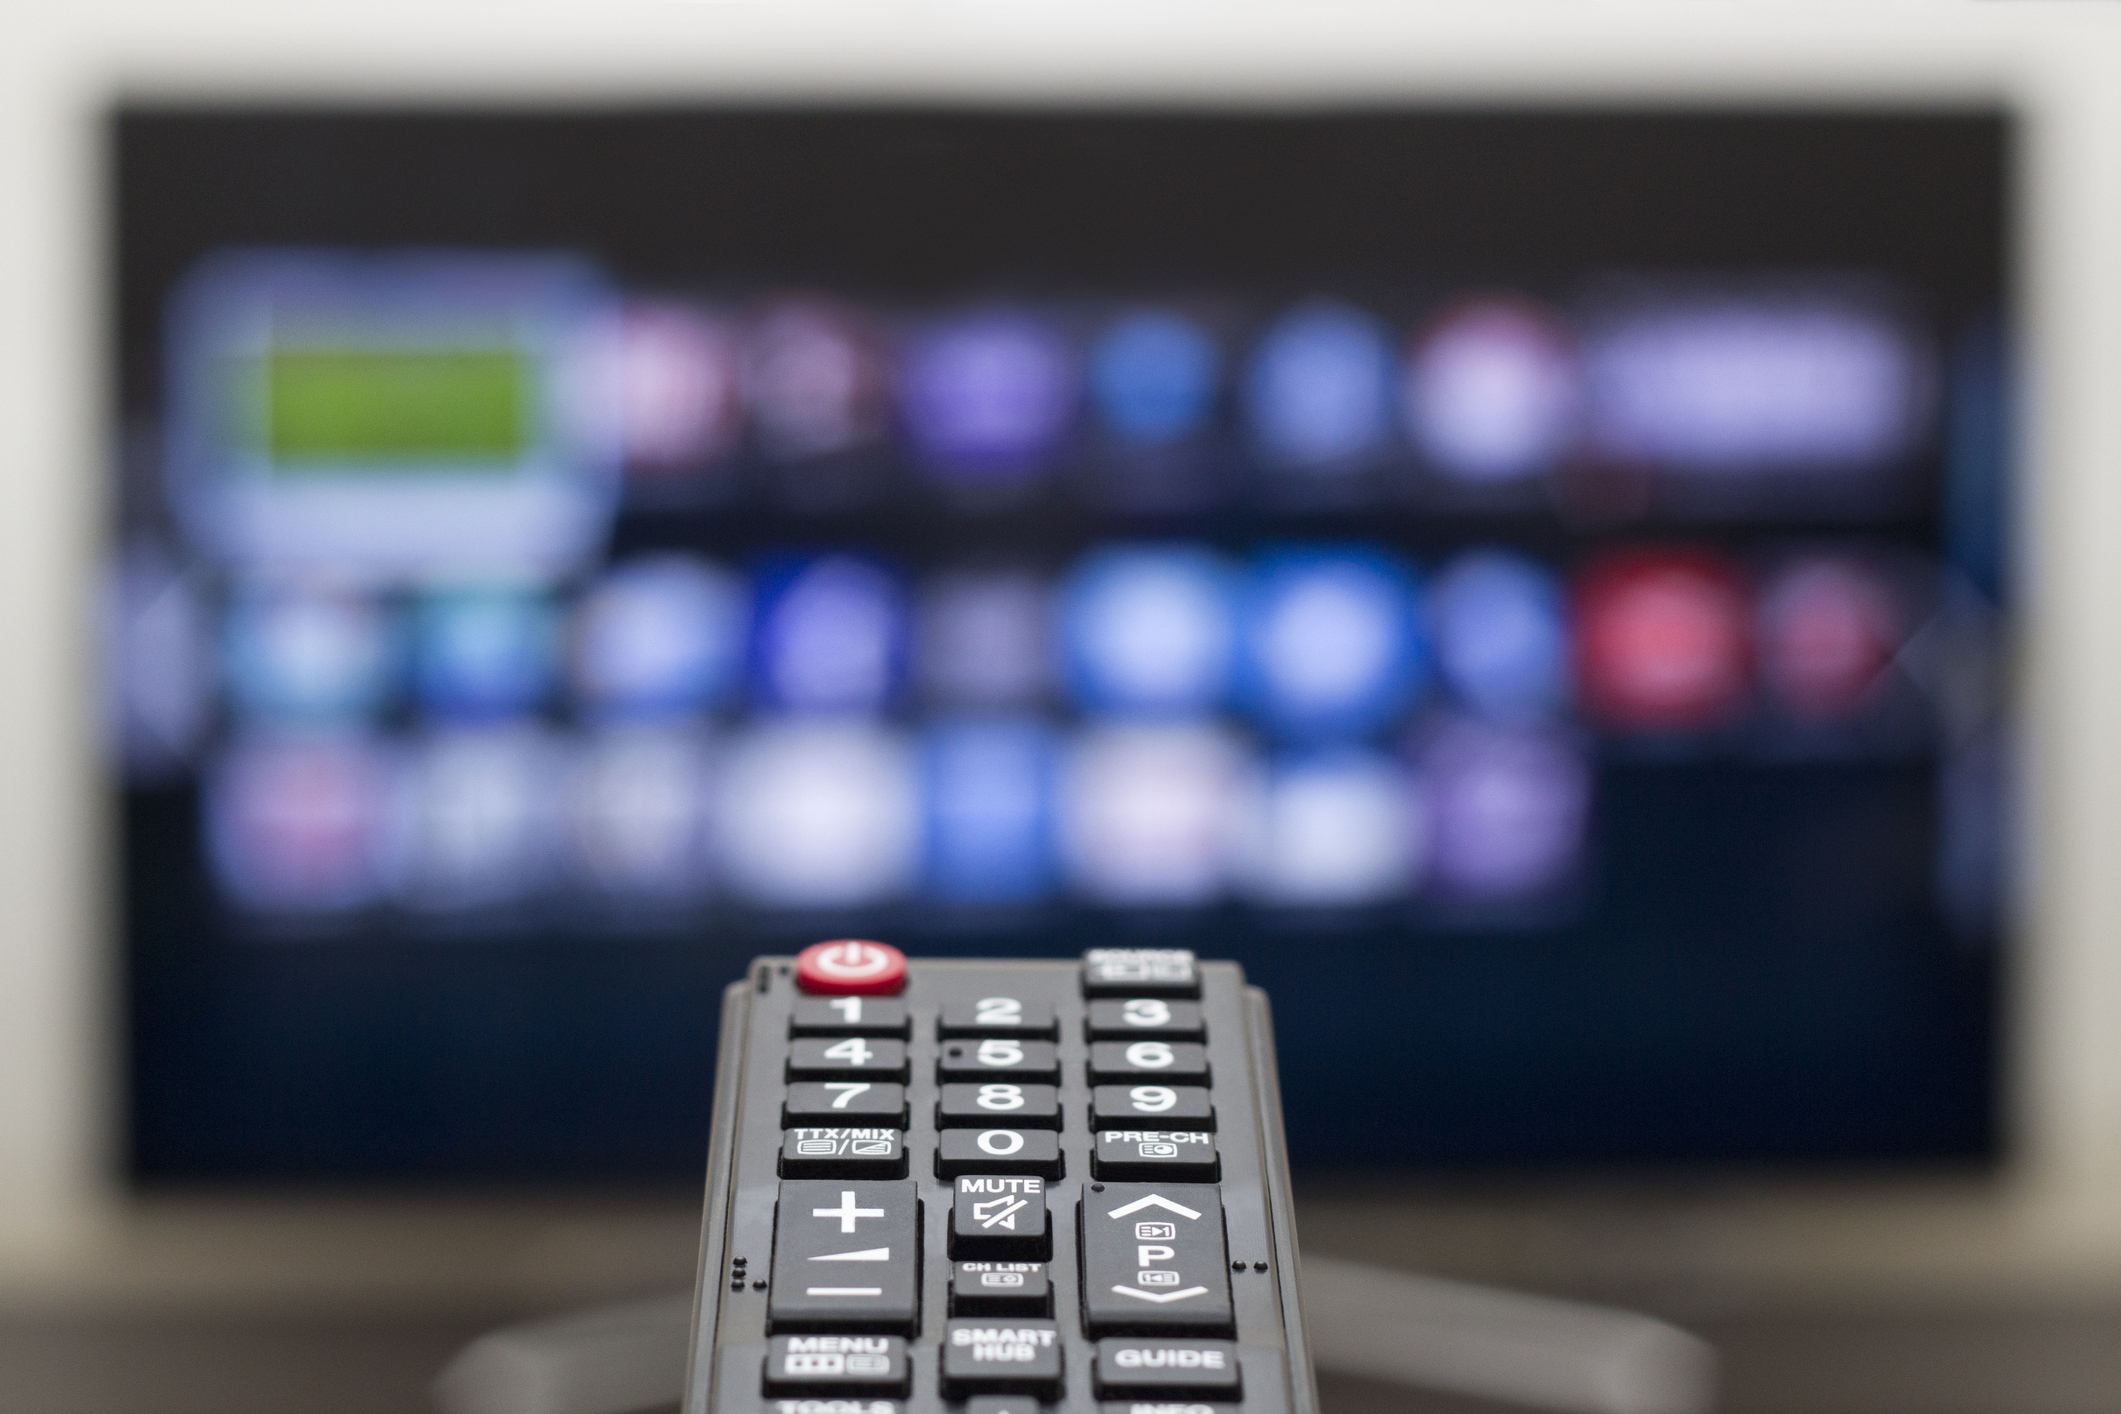 Outsmart Your Smart TV: Take Simple Steps to Protect Your Privacy